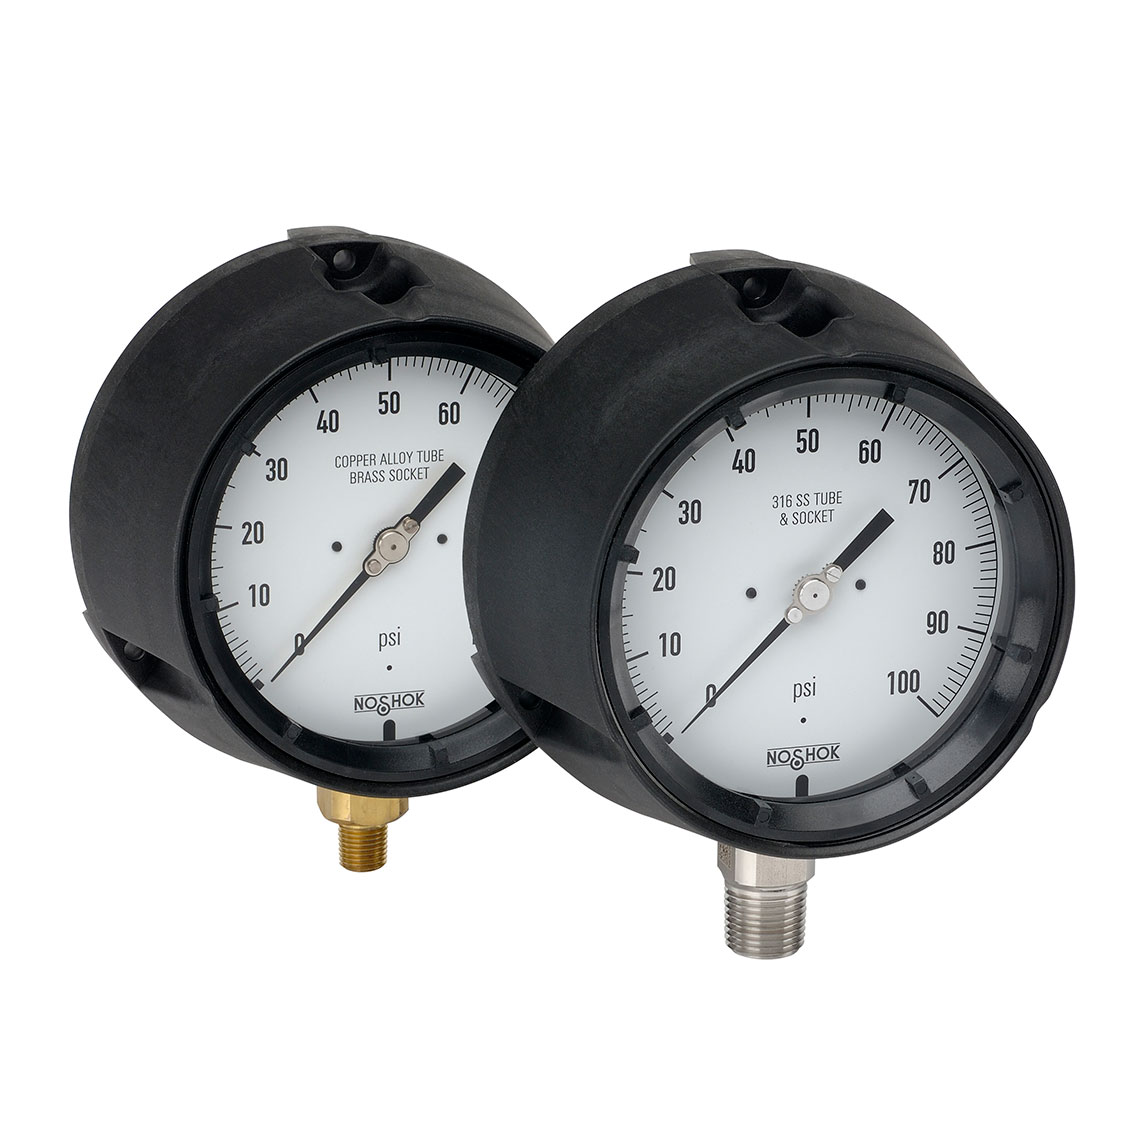 45-740-3000-psi 600/700 Series Process Dry and Liquid Filled Pressure Gauges